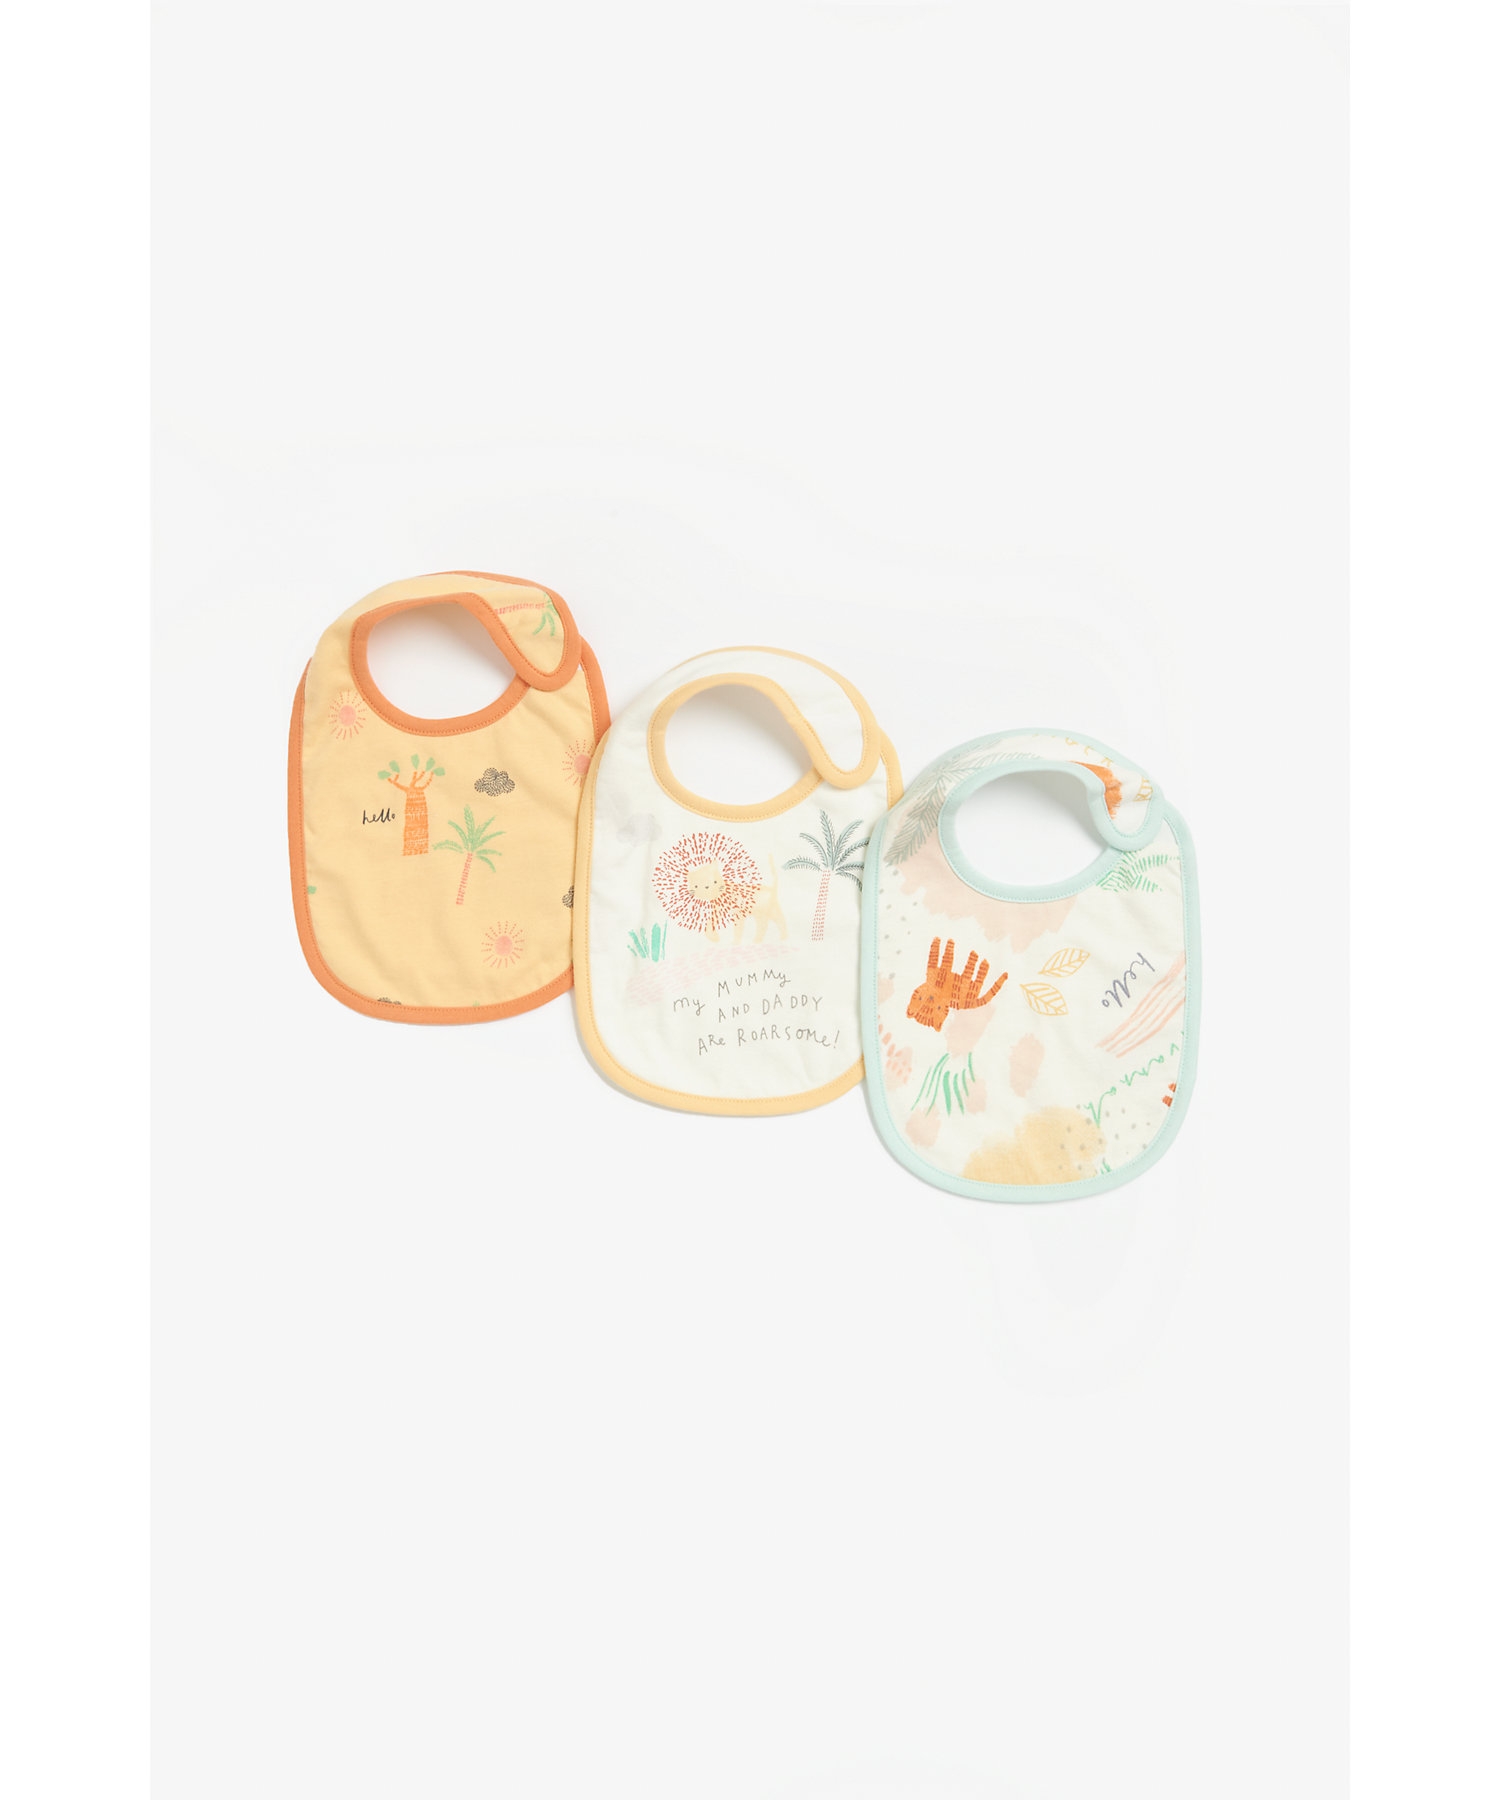 Mothercare | Mothercare Animal Kingdom Mummy Daddy Bibs Multicolor Pack of 3 0